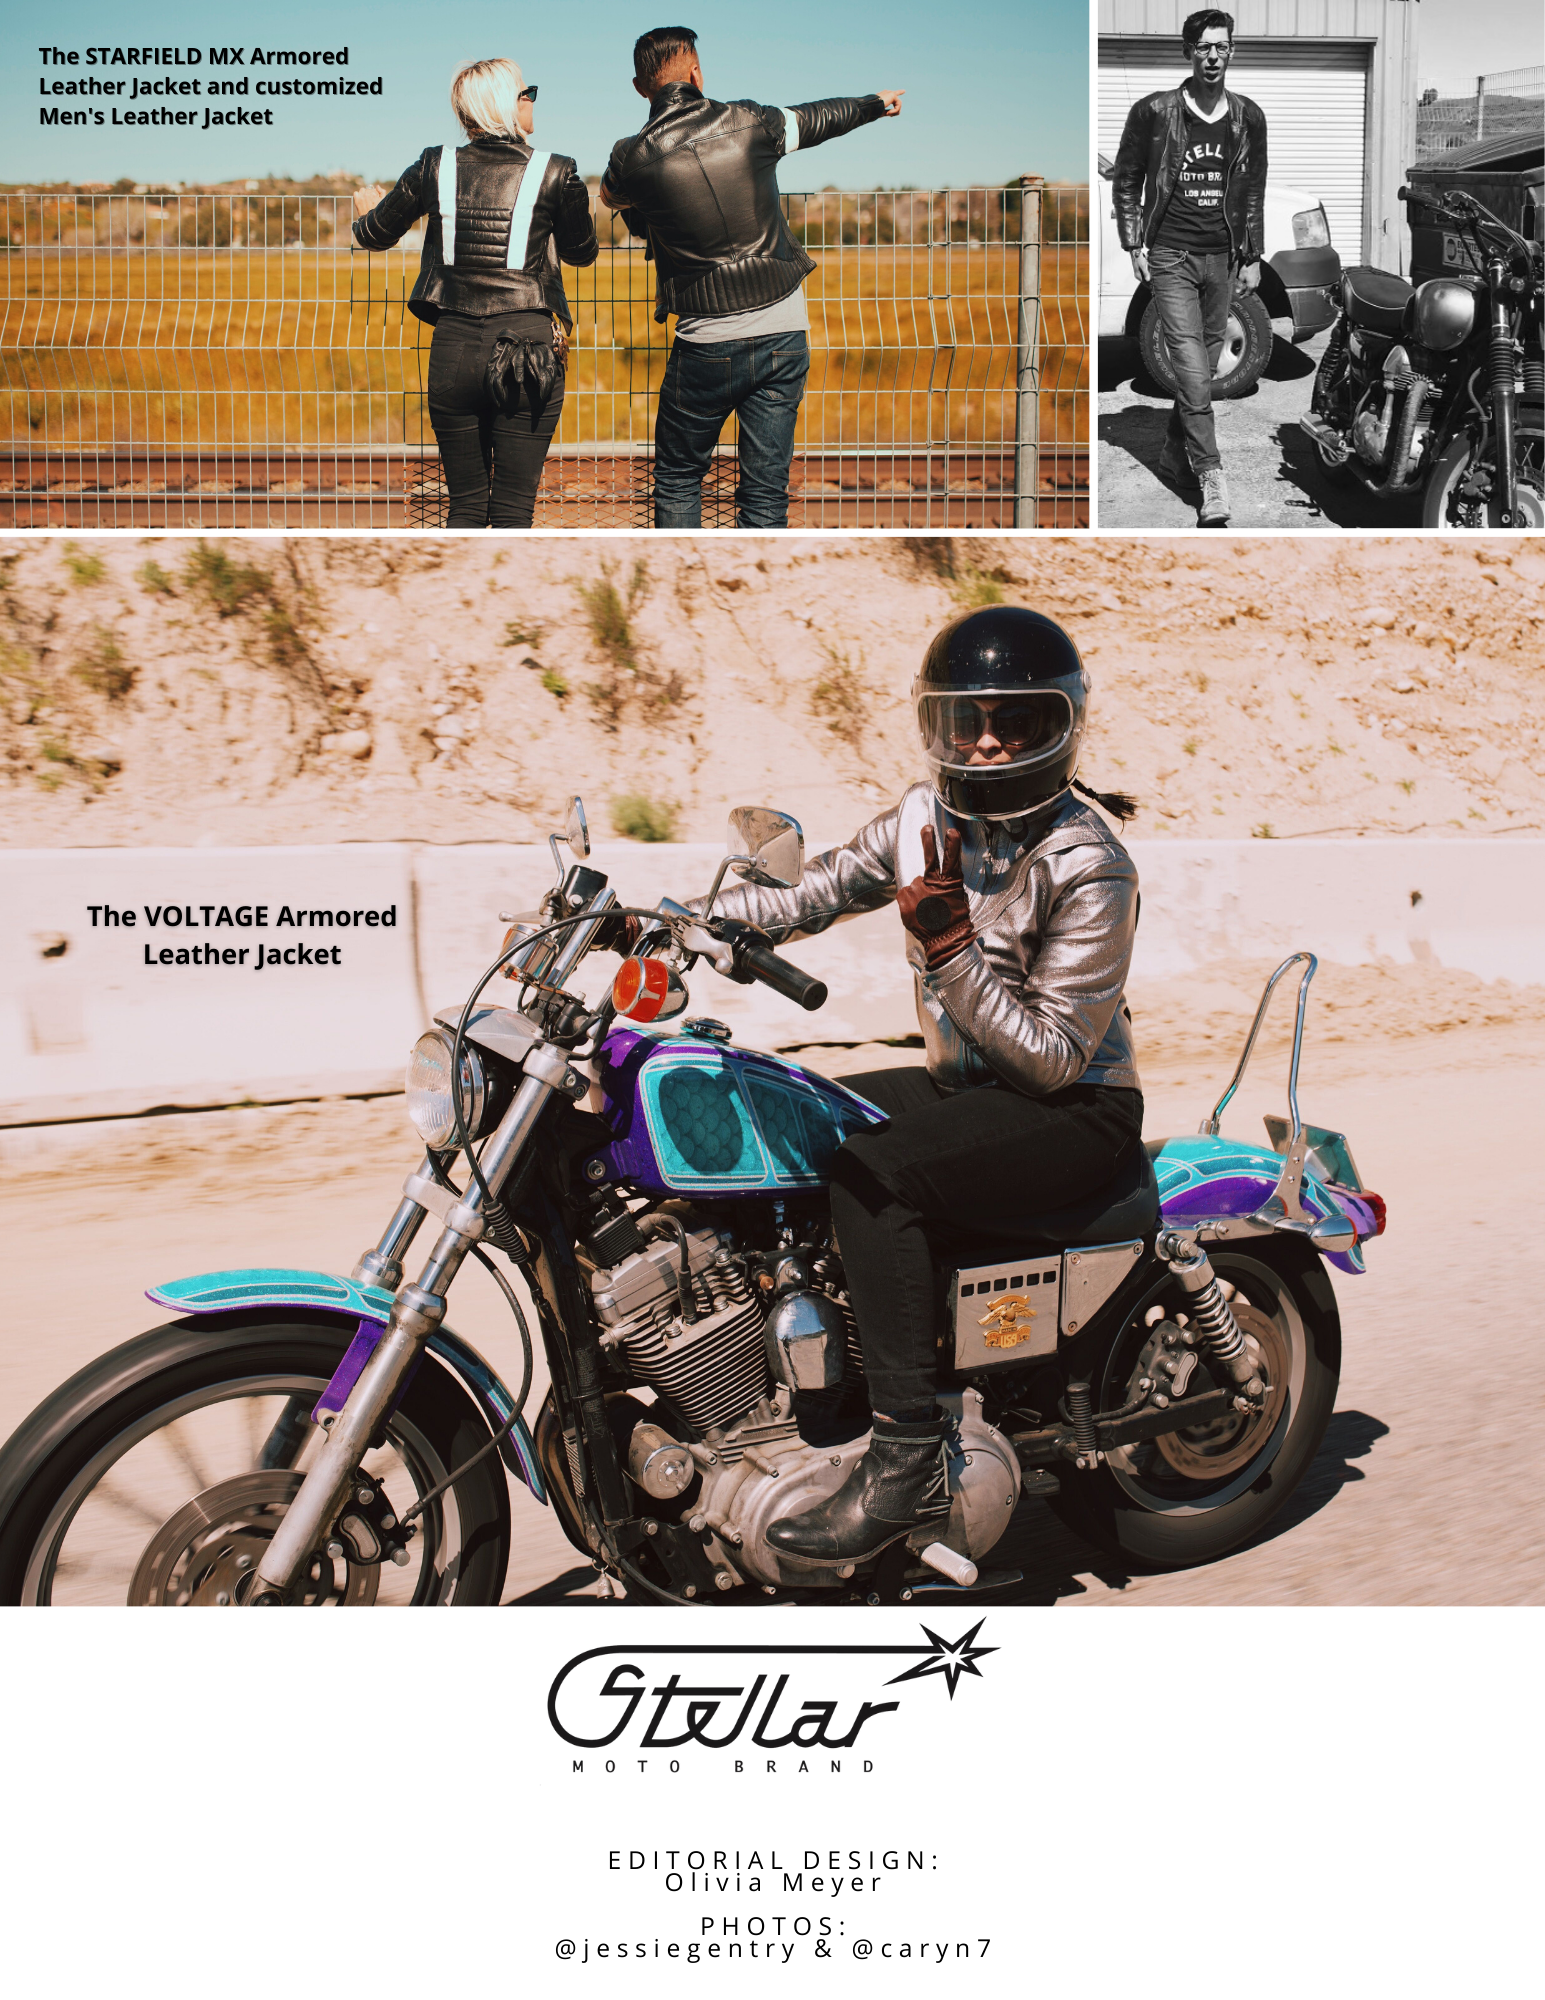 The STARFIELD MX Armored Leather Jacket and customized Men's Leather Jacket 